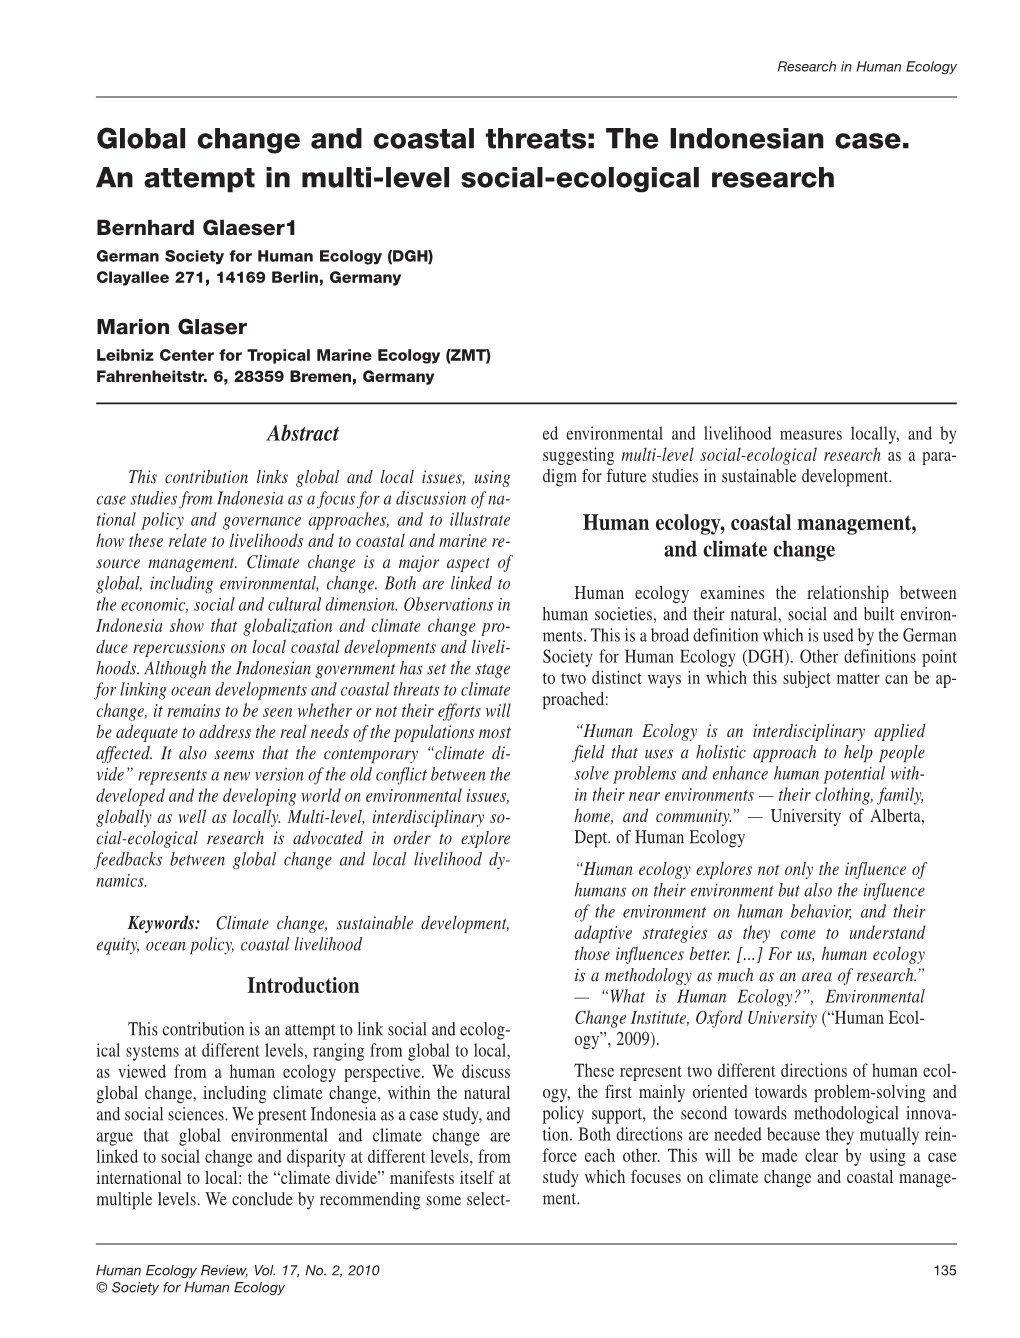 Global Change and Coastal Threats: the Indonesian Case. an Attempt in Multi-Level Social-Ecological Research